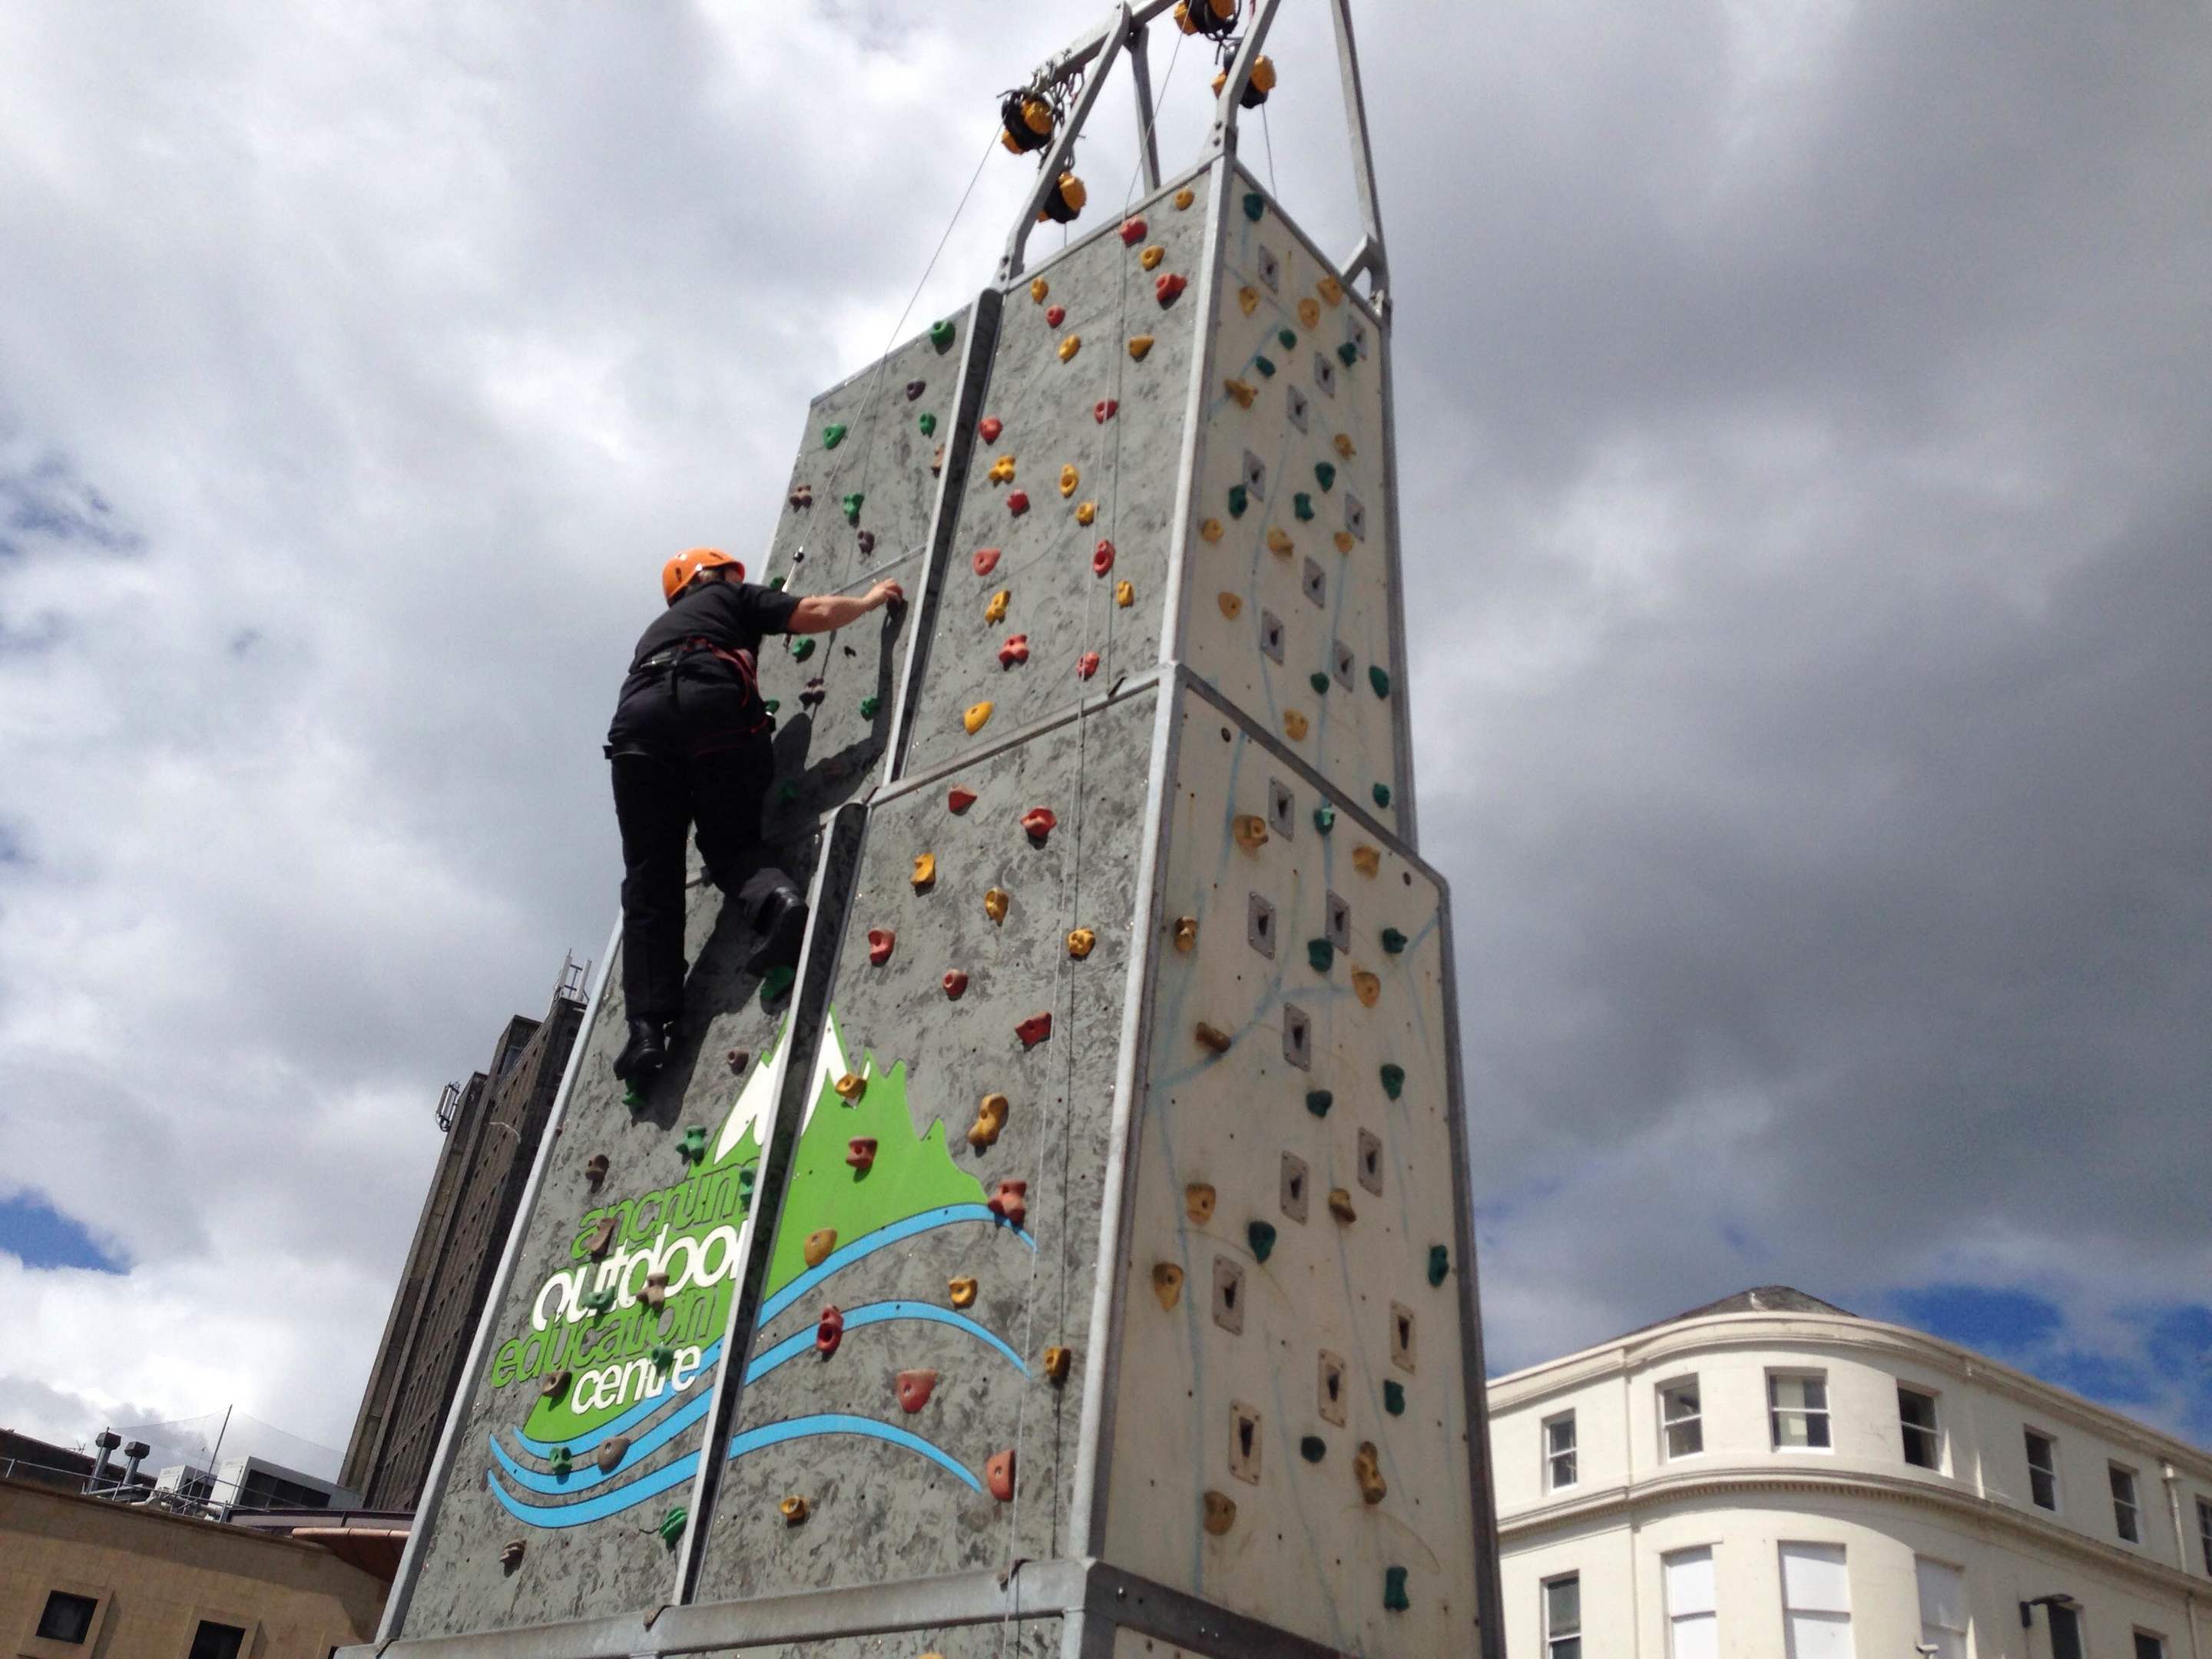 Inspector Cath Lannen takes on the climbing wall